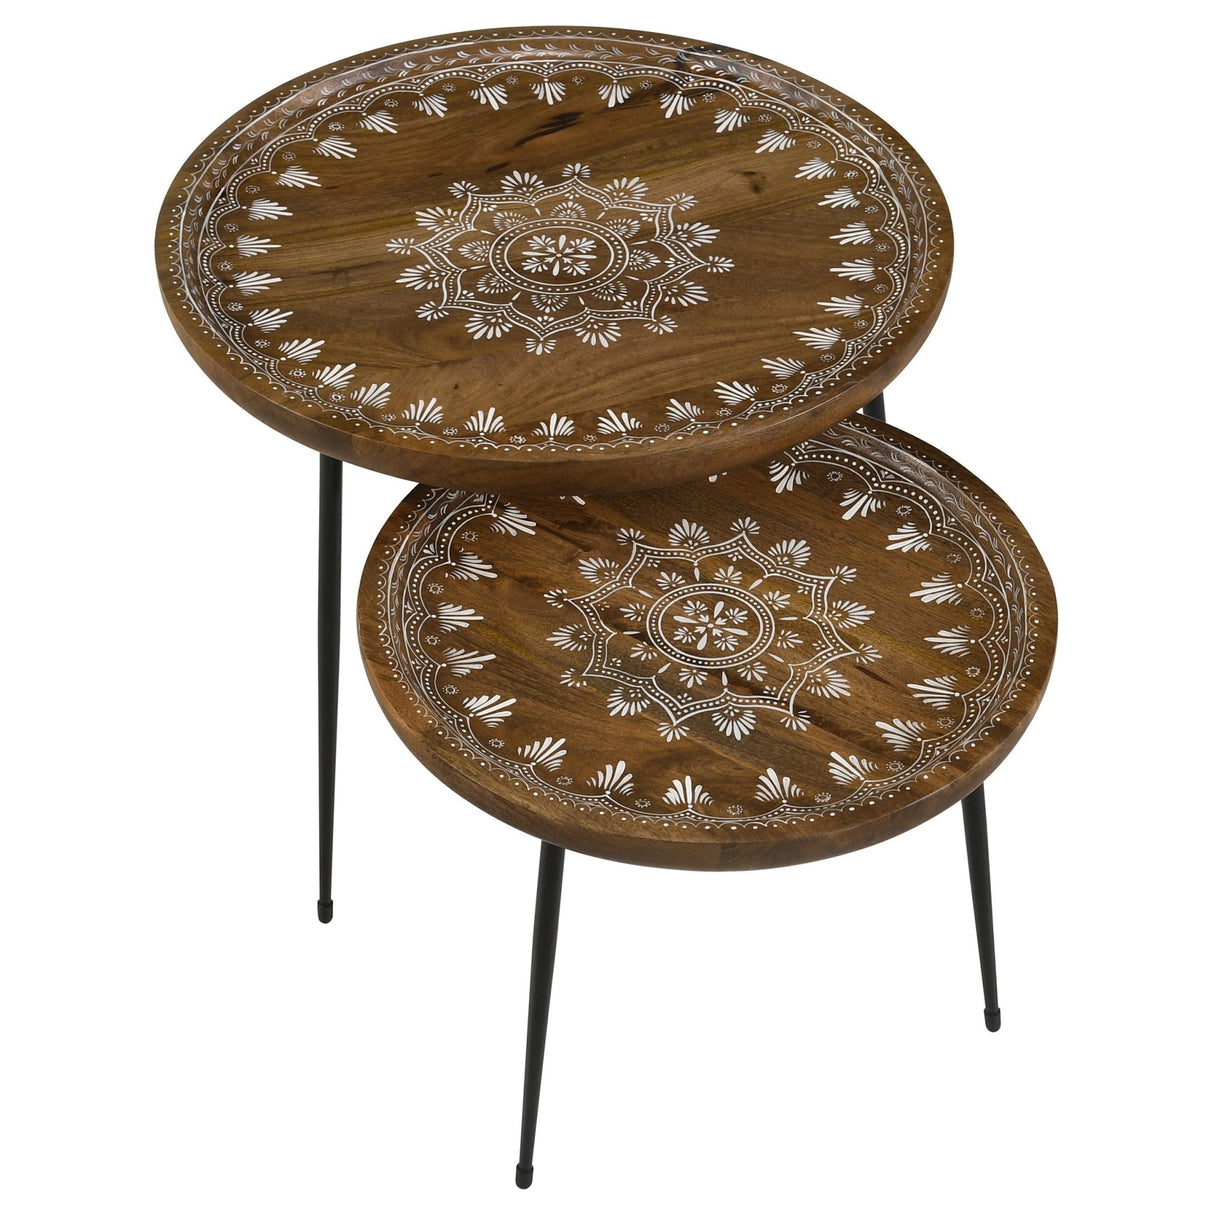 2 Pc Nesting Table - Nuala 2-piece Round Nesting Table with Tripod Tapered Legs Honey and Black